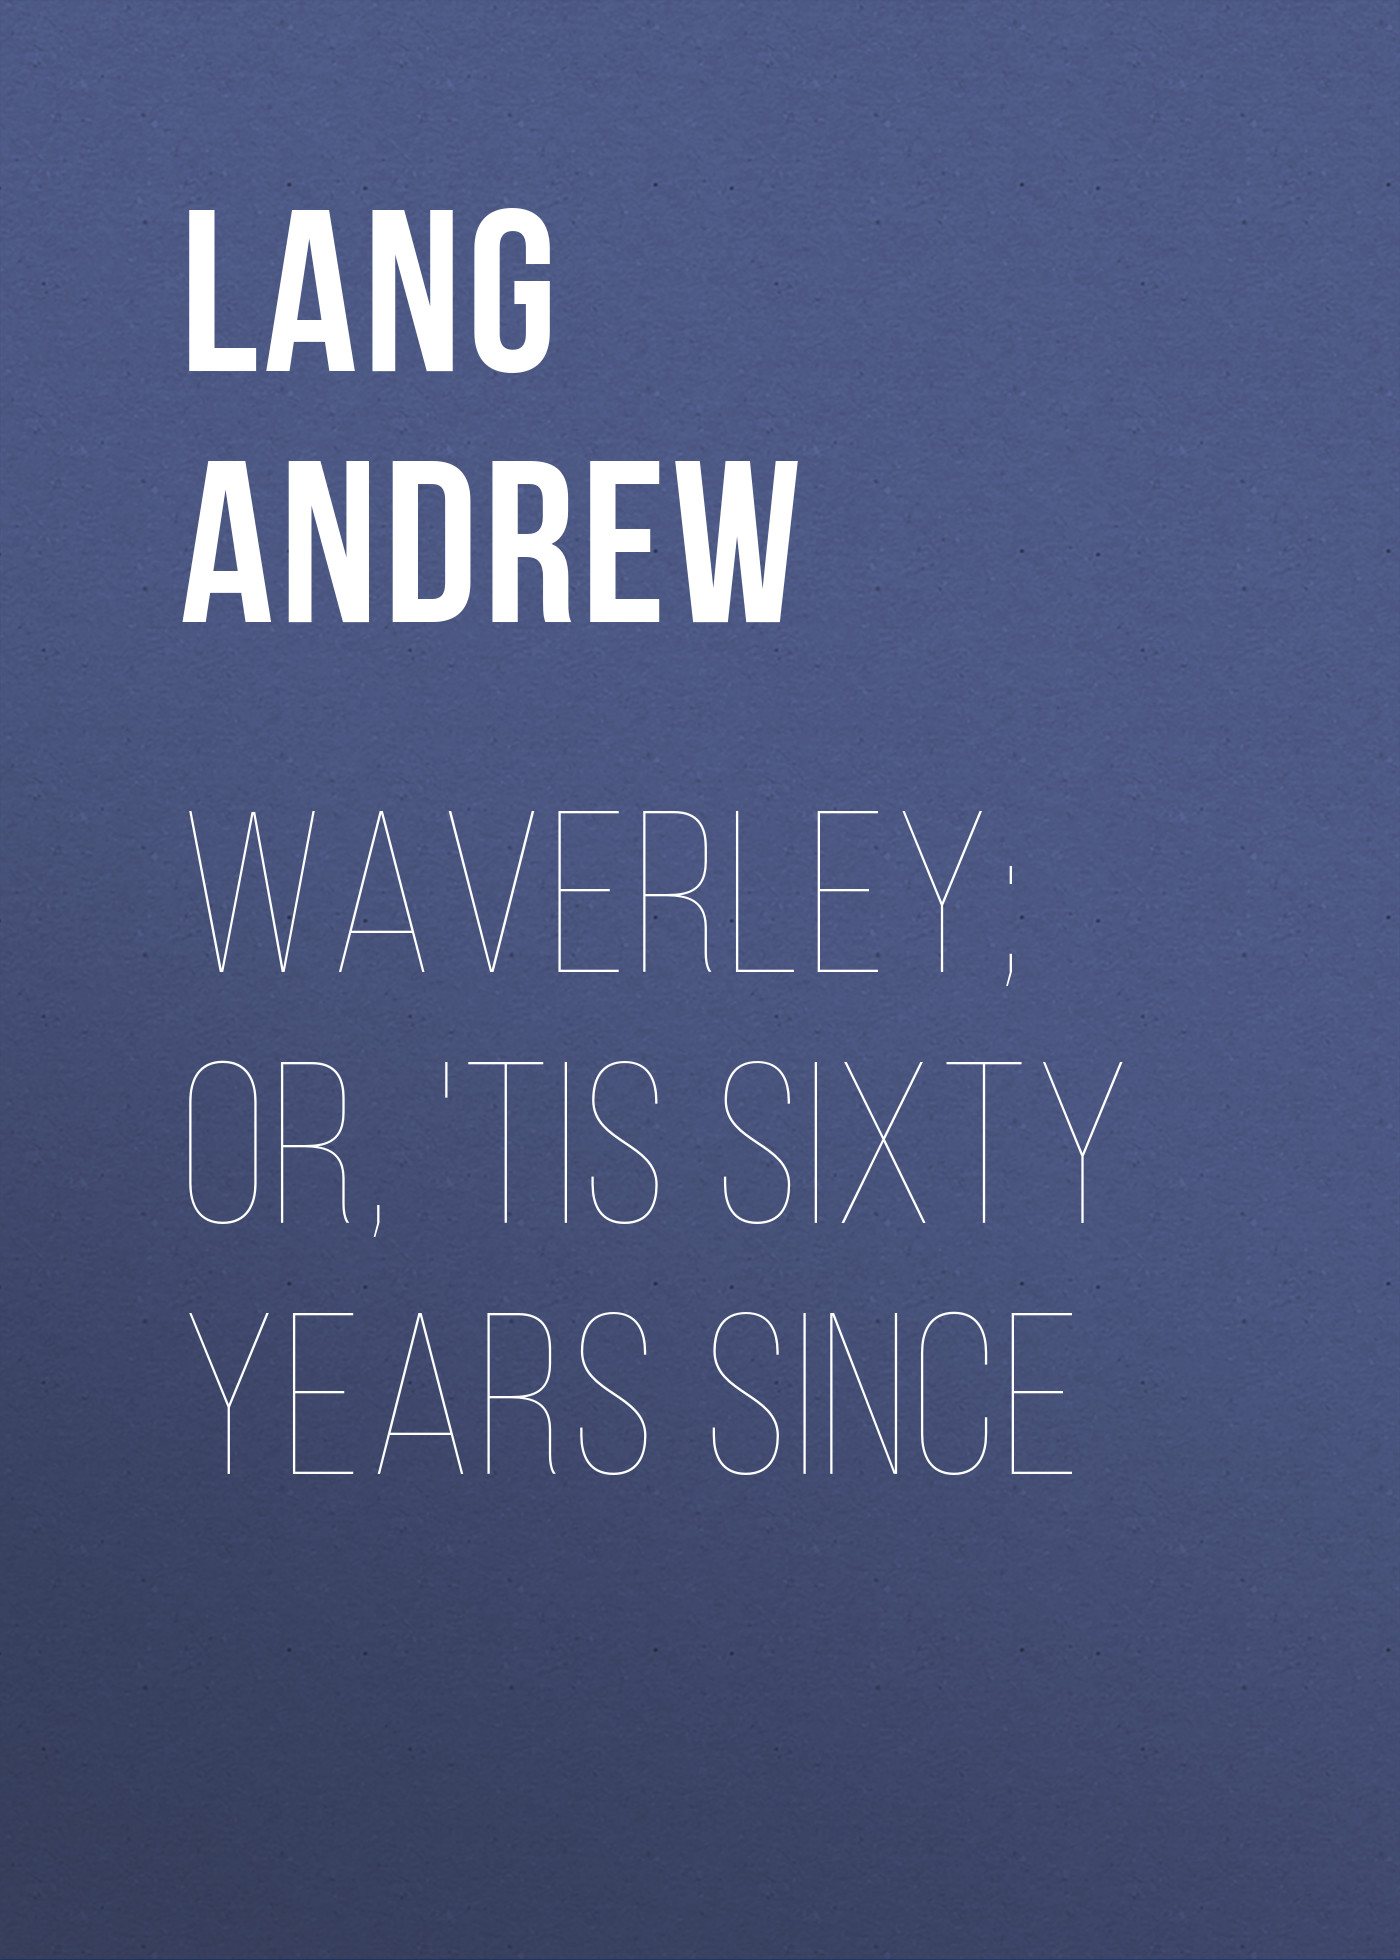 Lang Andrew Waverley; Or, 'Tis Sixty Years Since